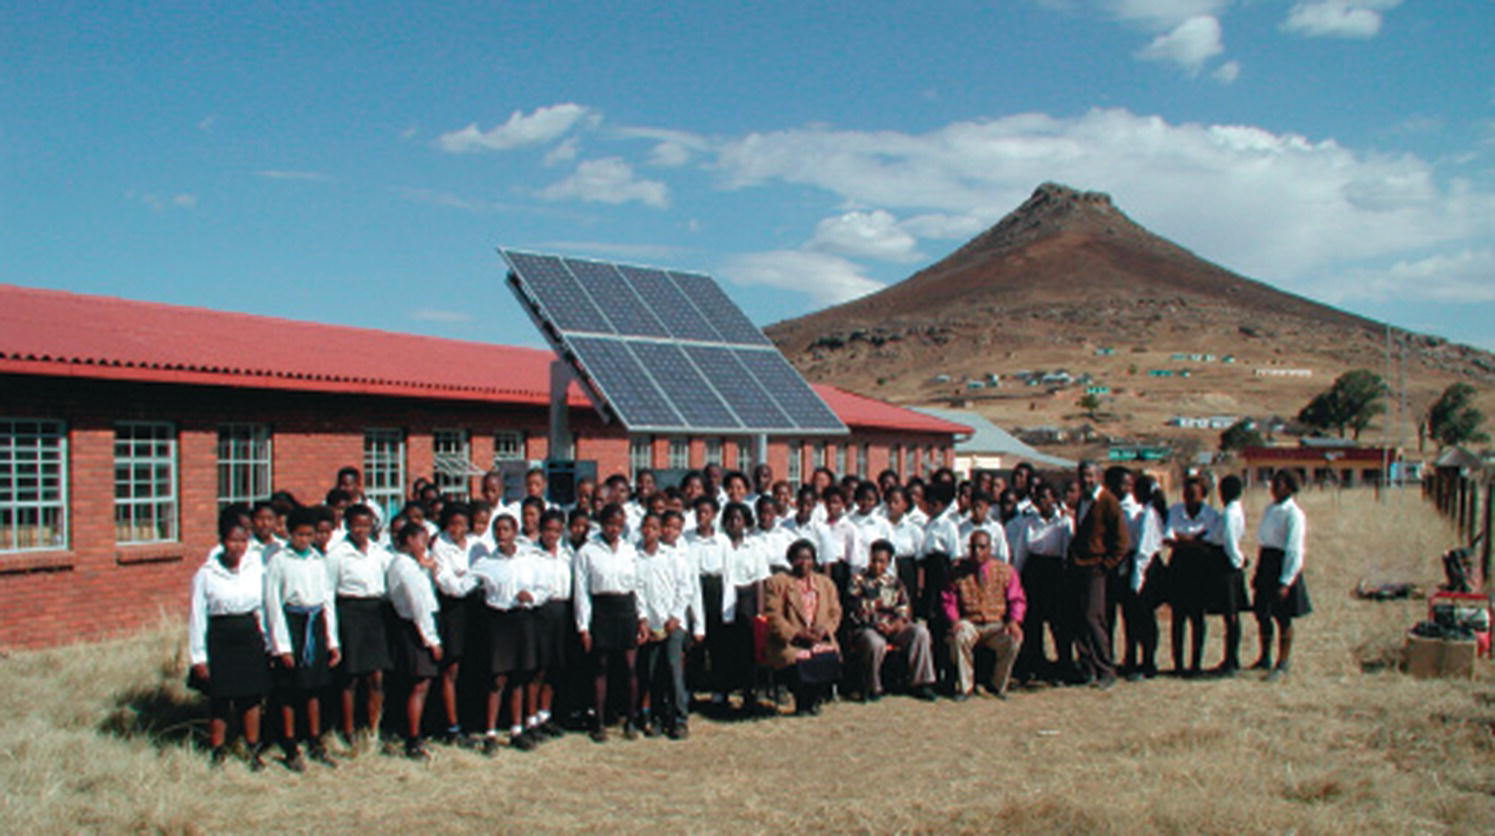 Bunch of students wearing uniforms standing together with the teachers from South Africa, with a PV solar panel and a building in the background.